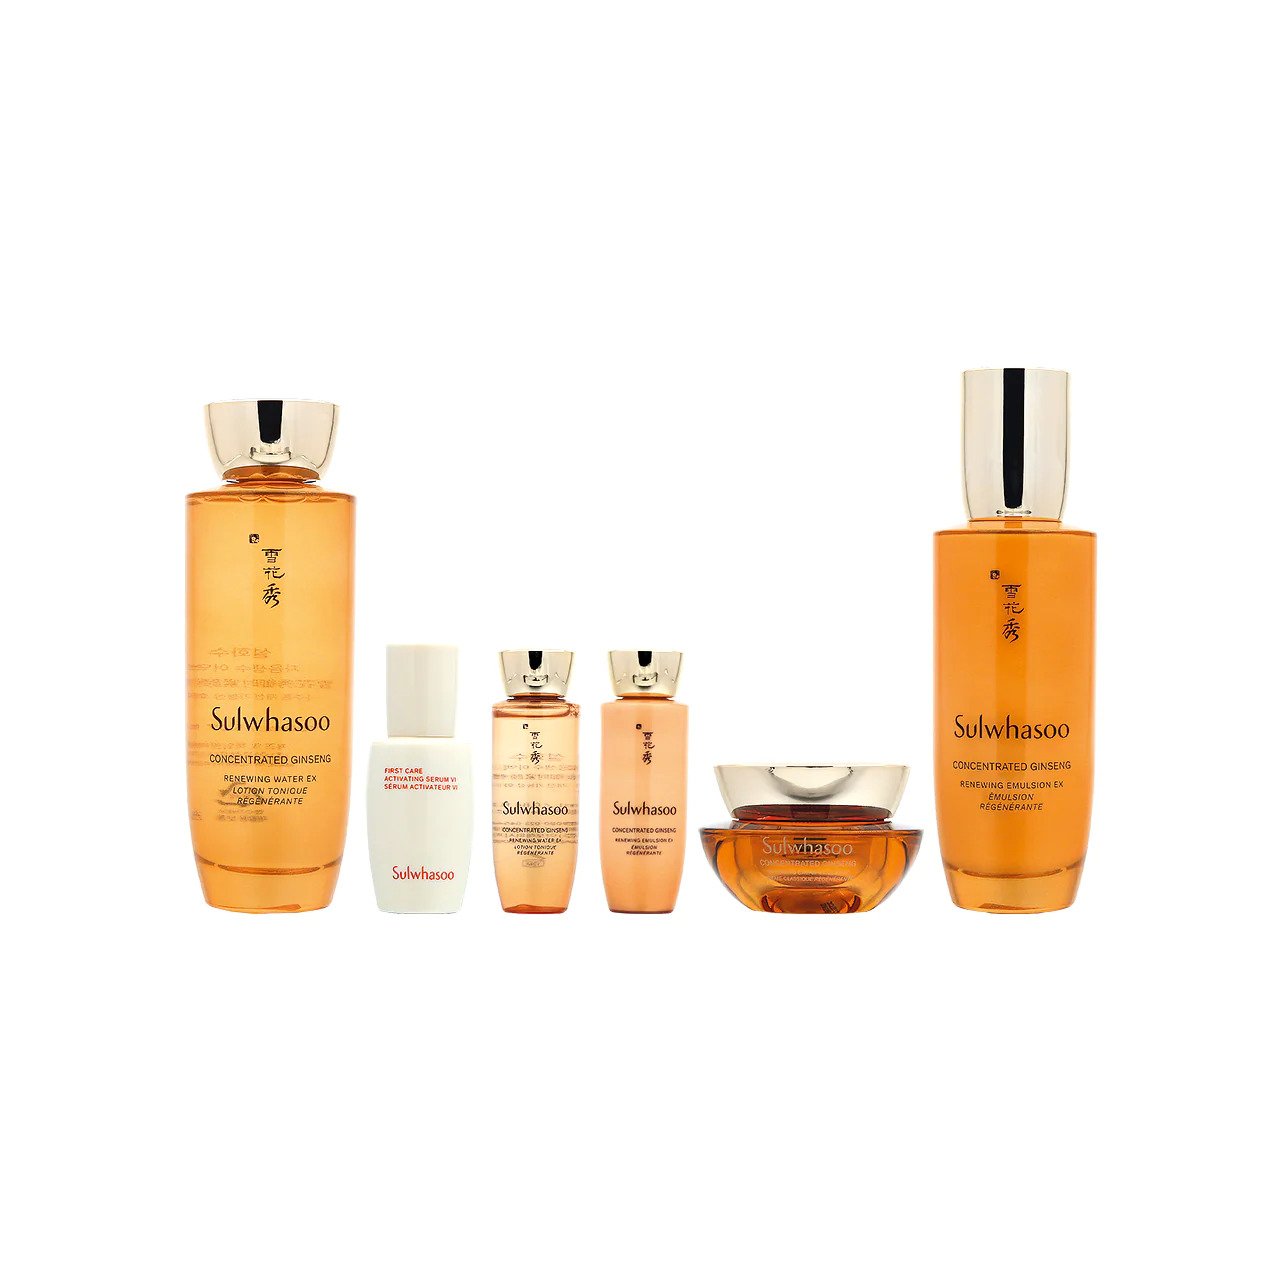 [K-beauty] Sulwhasoo Concentrated Ginseng Daily routine set